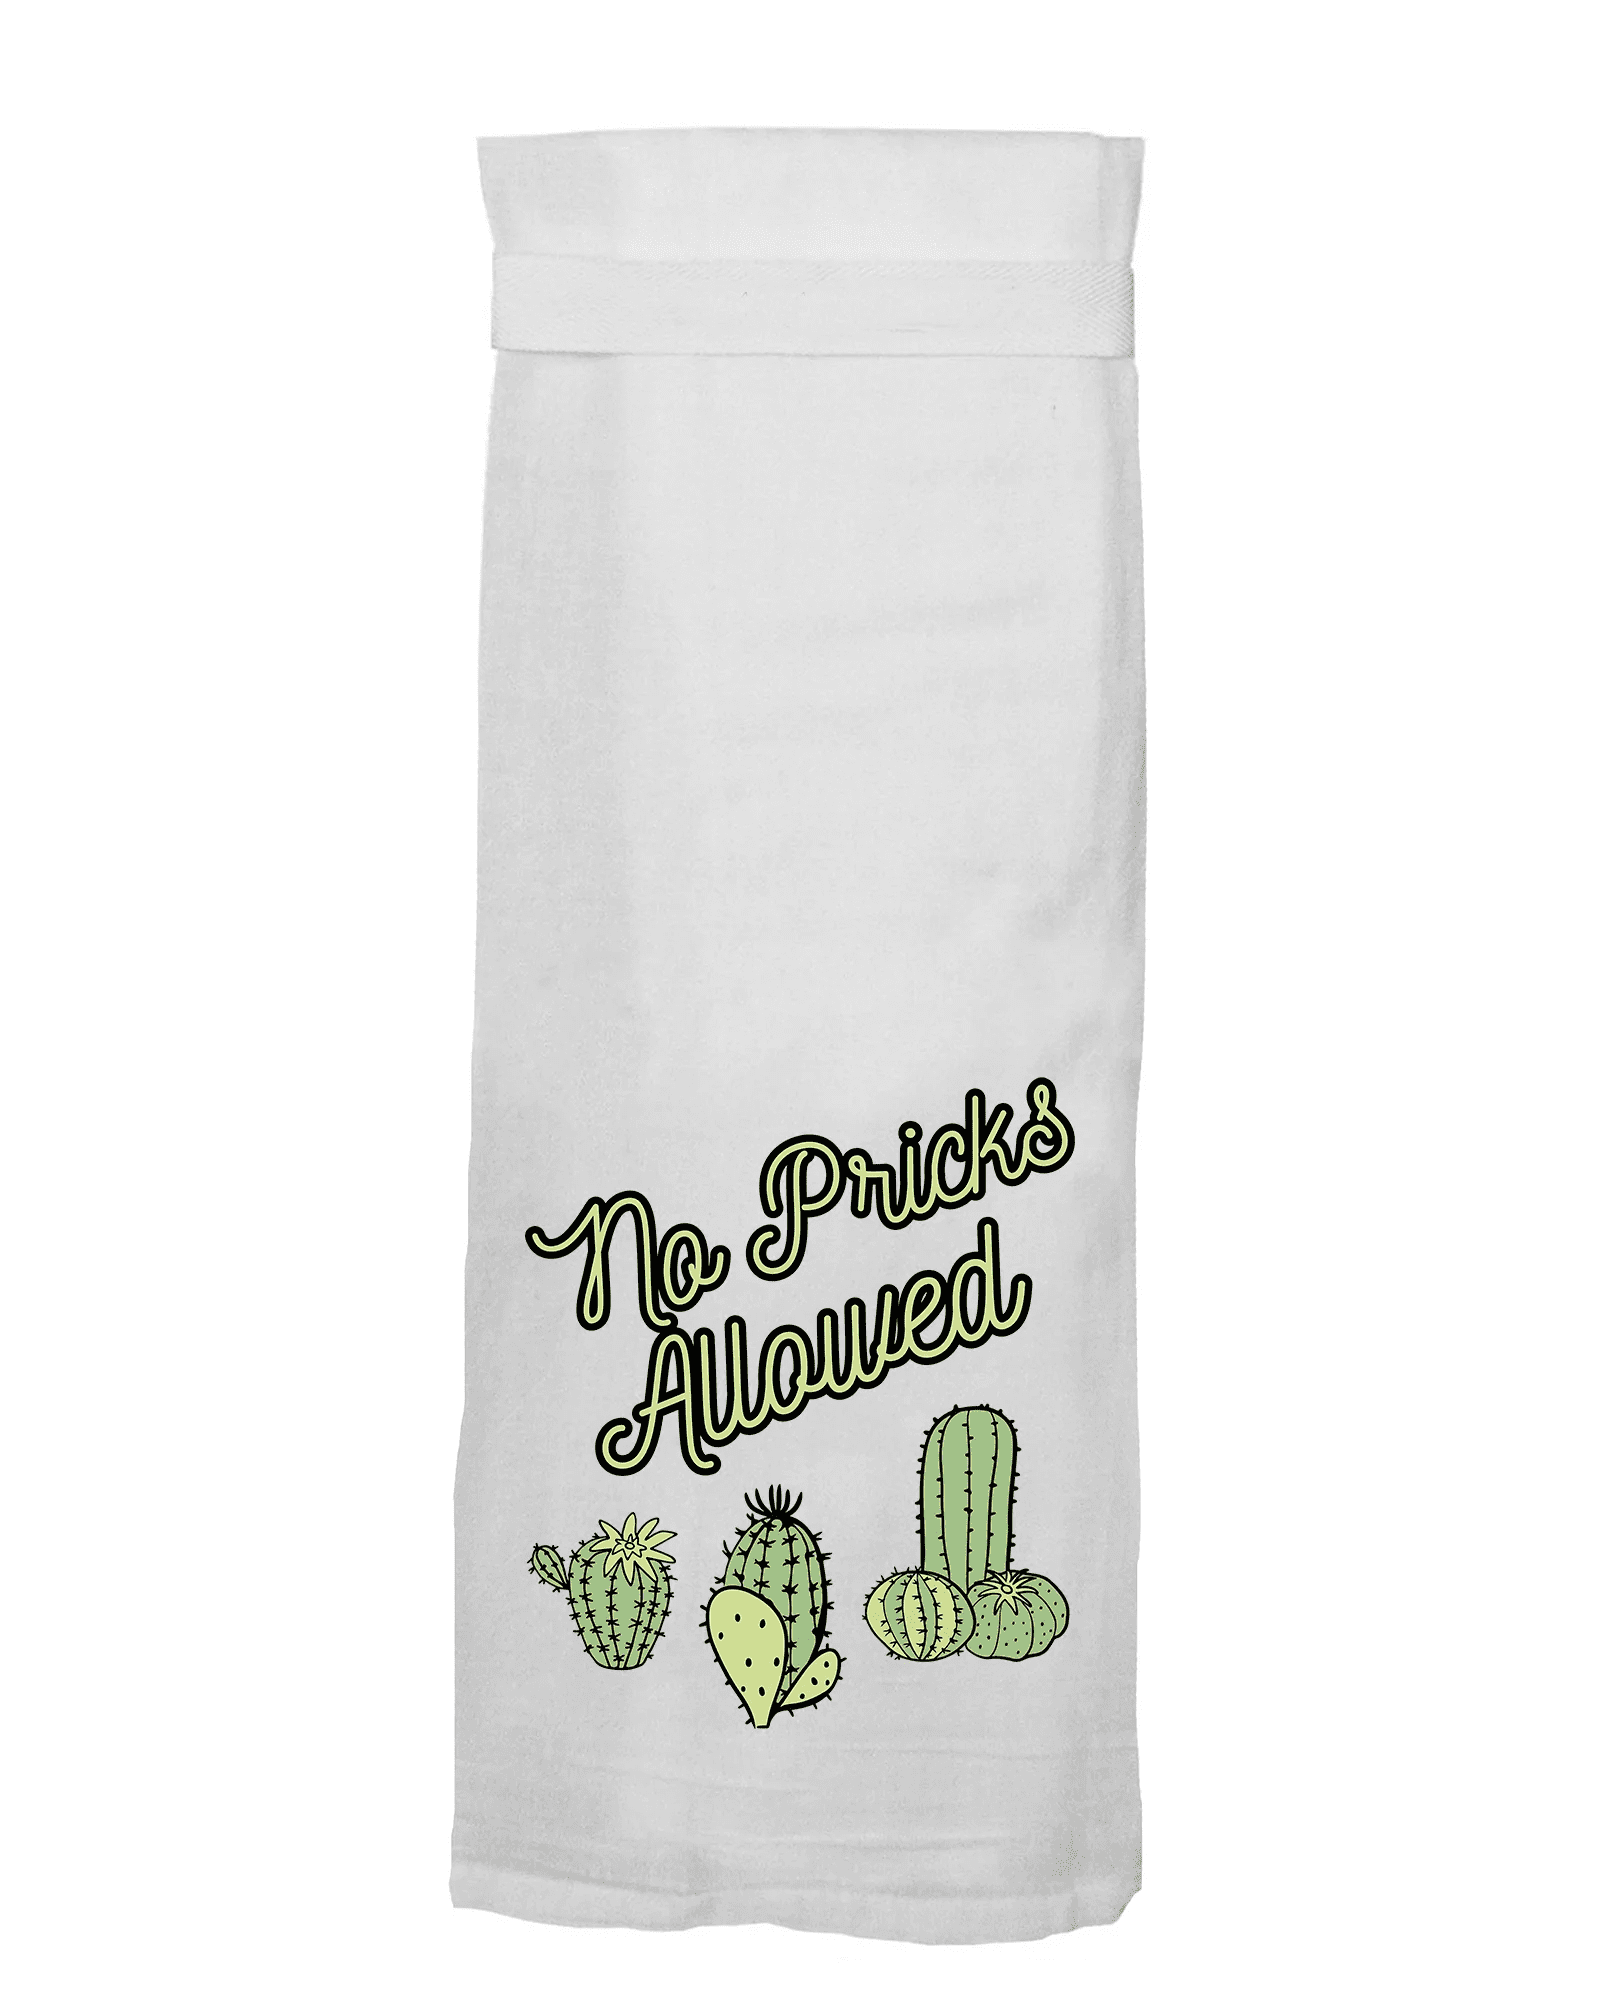 Funny Wholesale Kitchen Towels, Twisted Wares, Sometimes Open Mouth